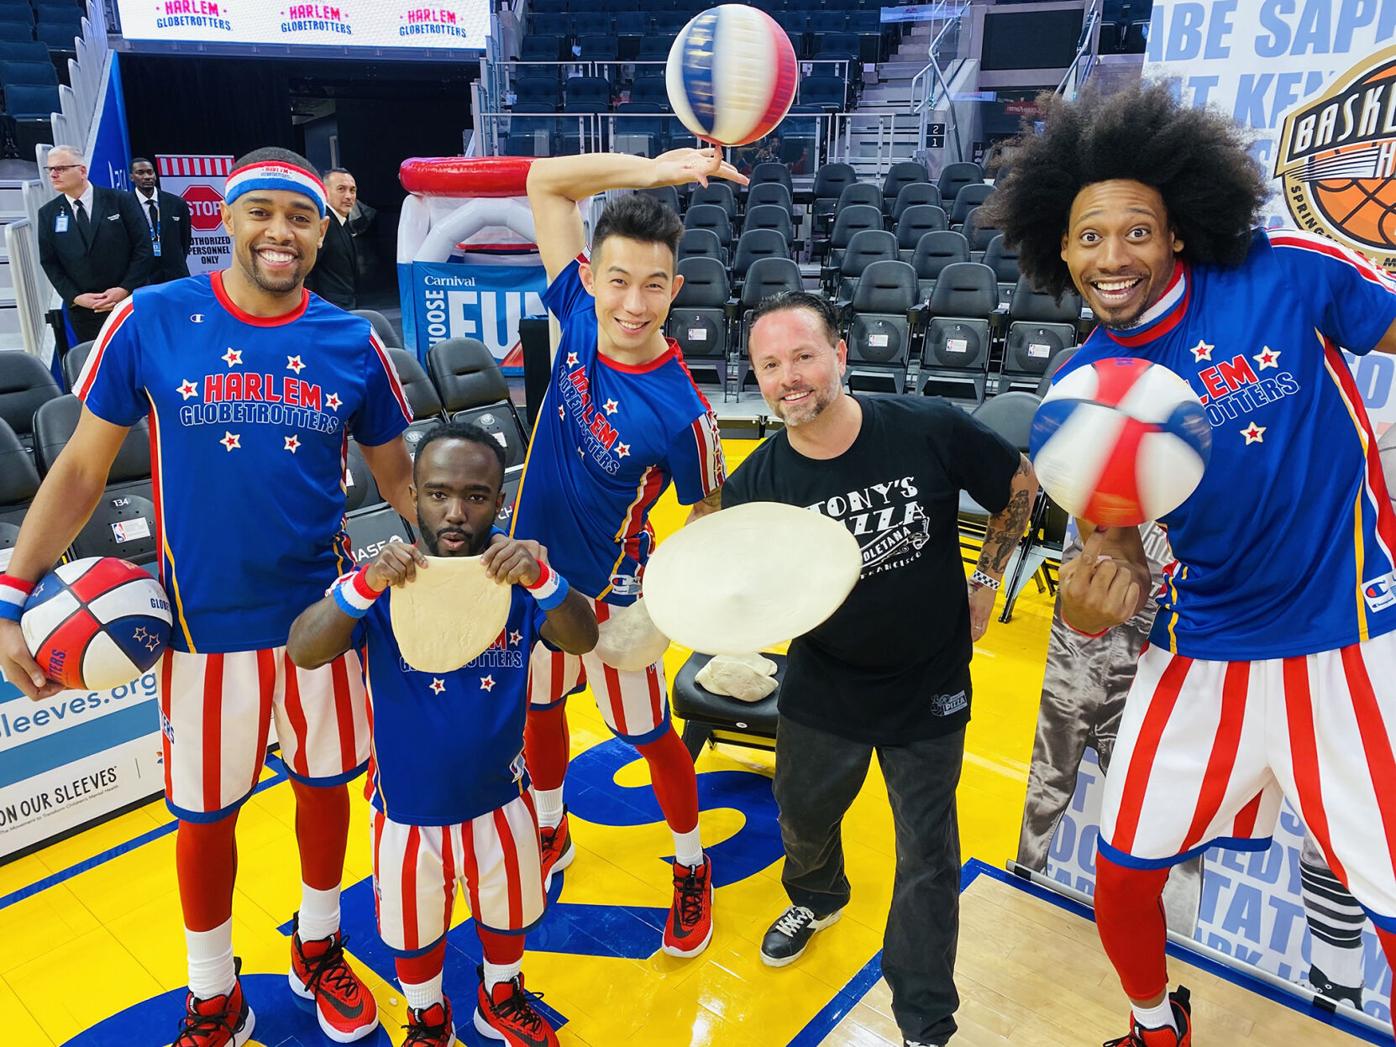 The Harlem Globetrotters Return to Chase Center on January 15, 2023